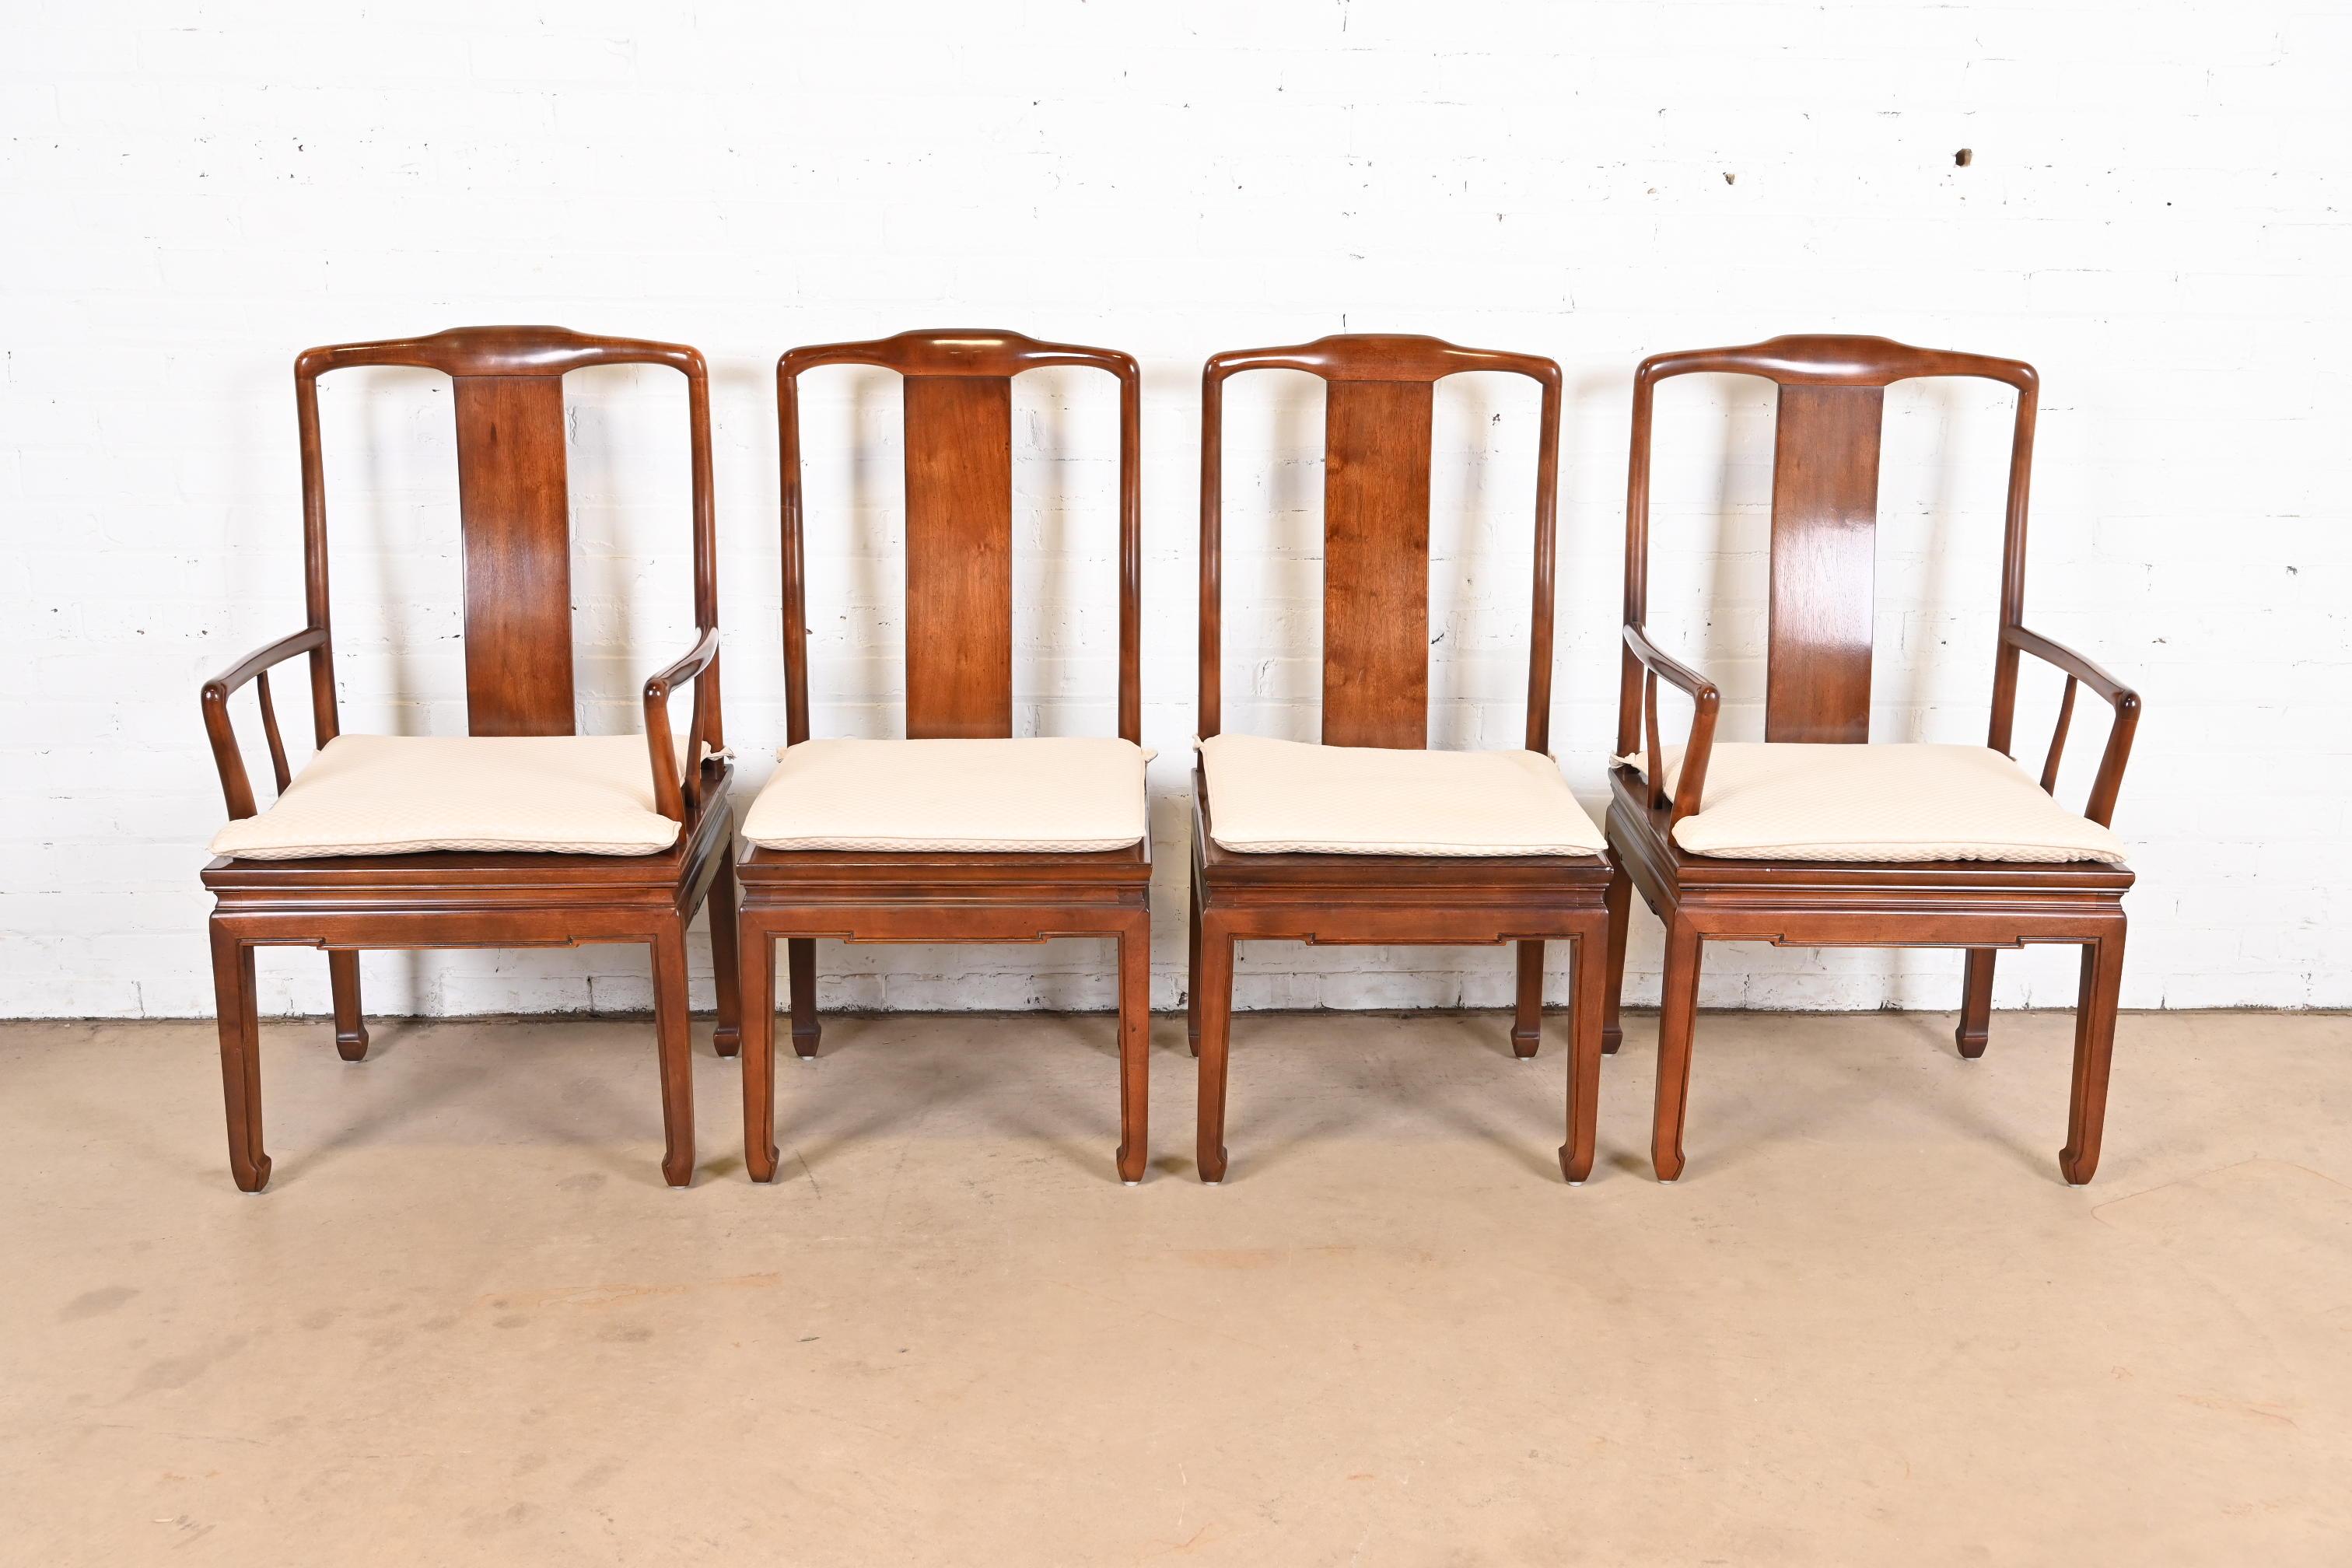 A gorgeous set of four mid-century modern Hollywood Regency Chinoiserie dining chairs

By Henredon

USA, Circa 1970s

Solid carved mahogany frames, with caned seats and upholstered seat cushions.

Measures:
Side chairs - 19.5